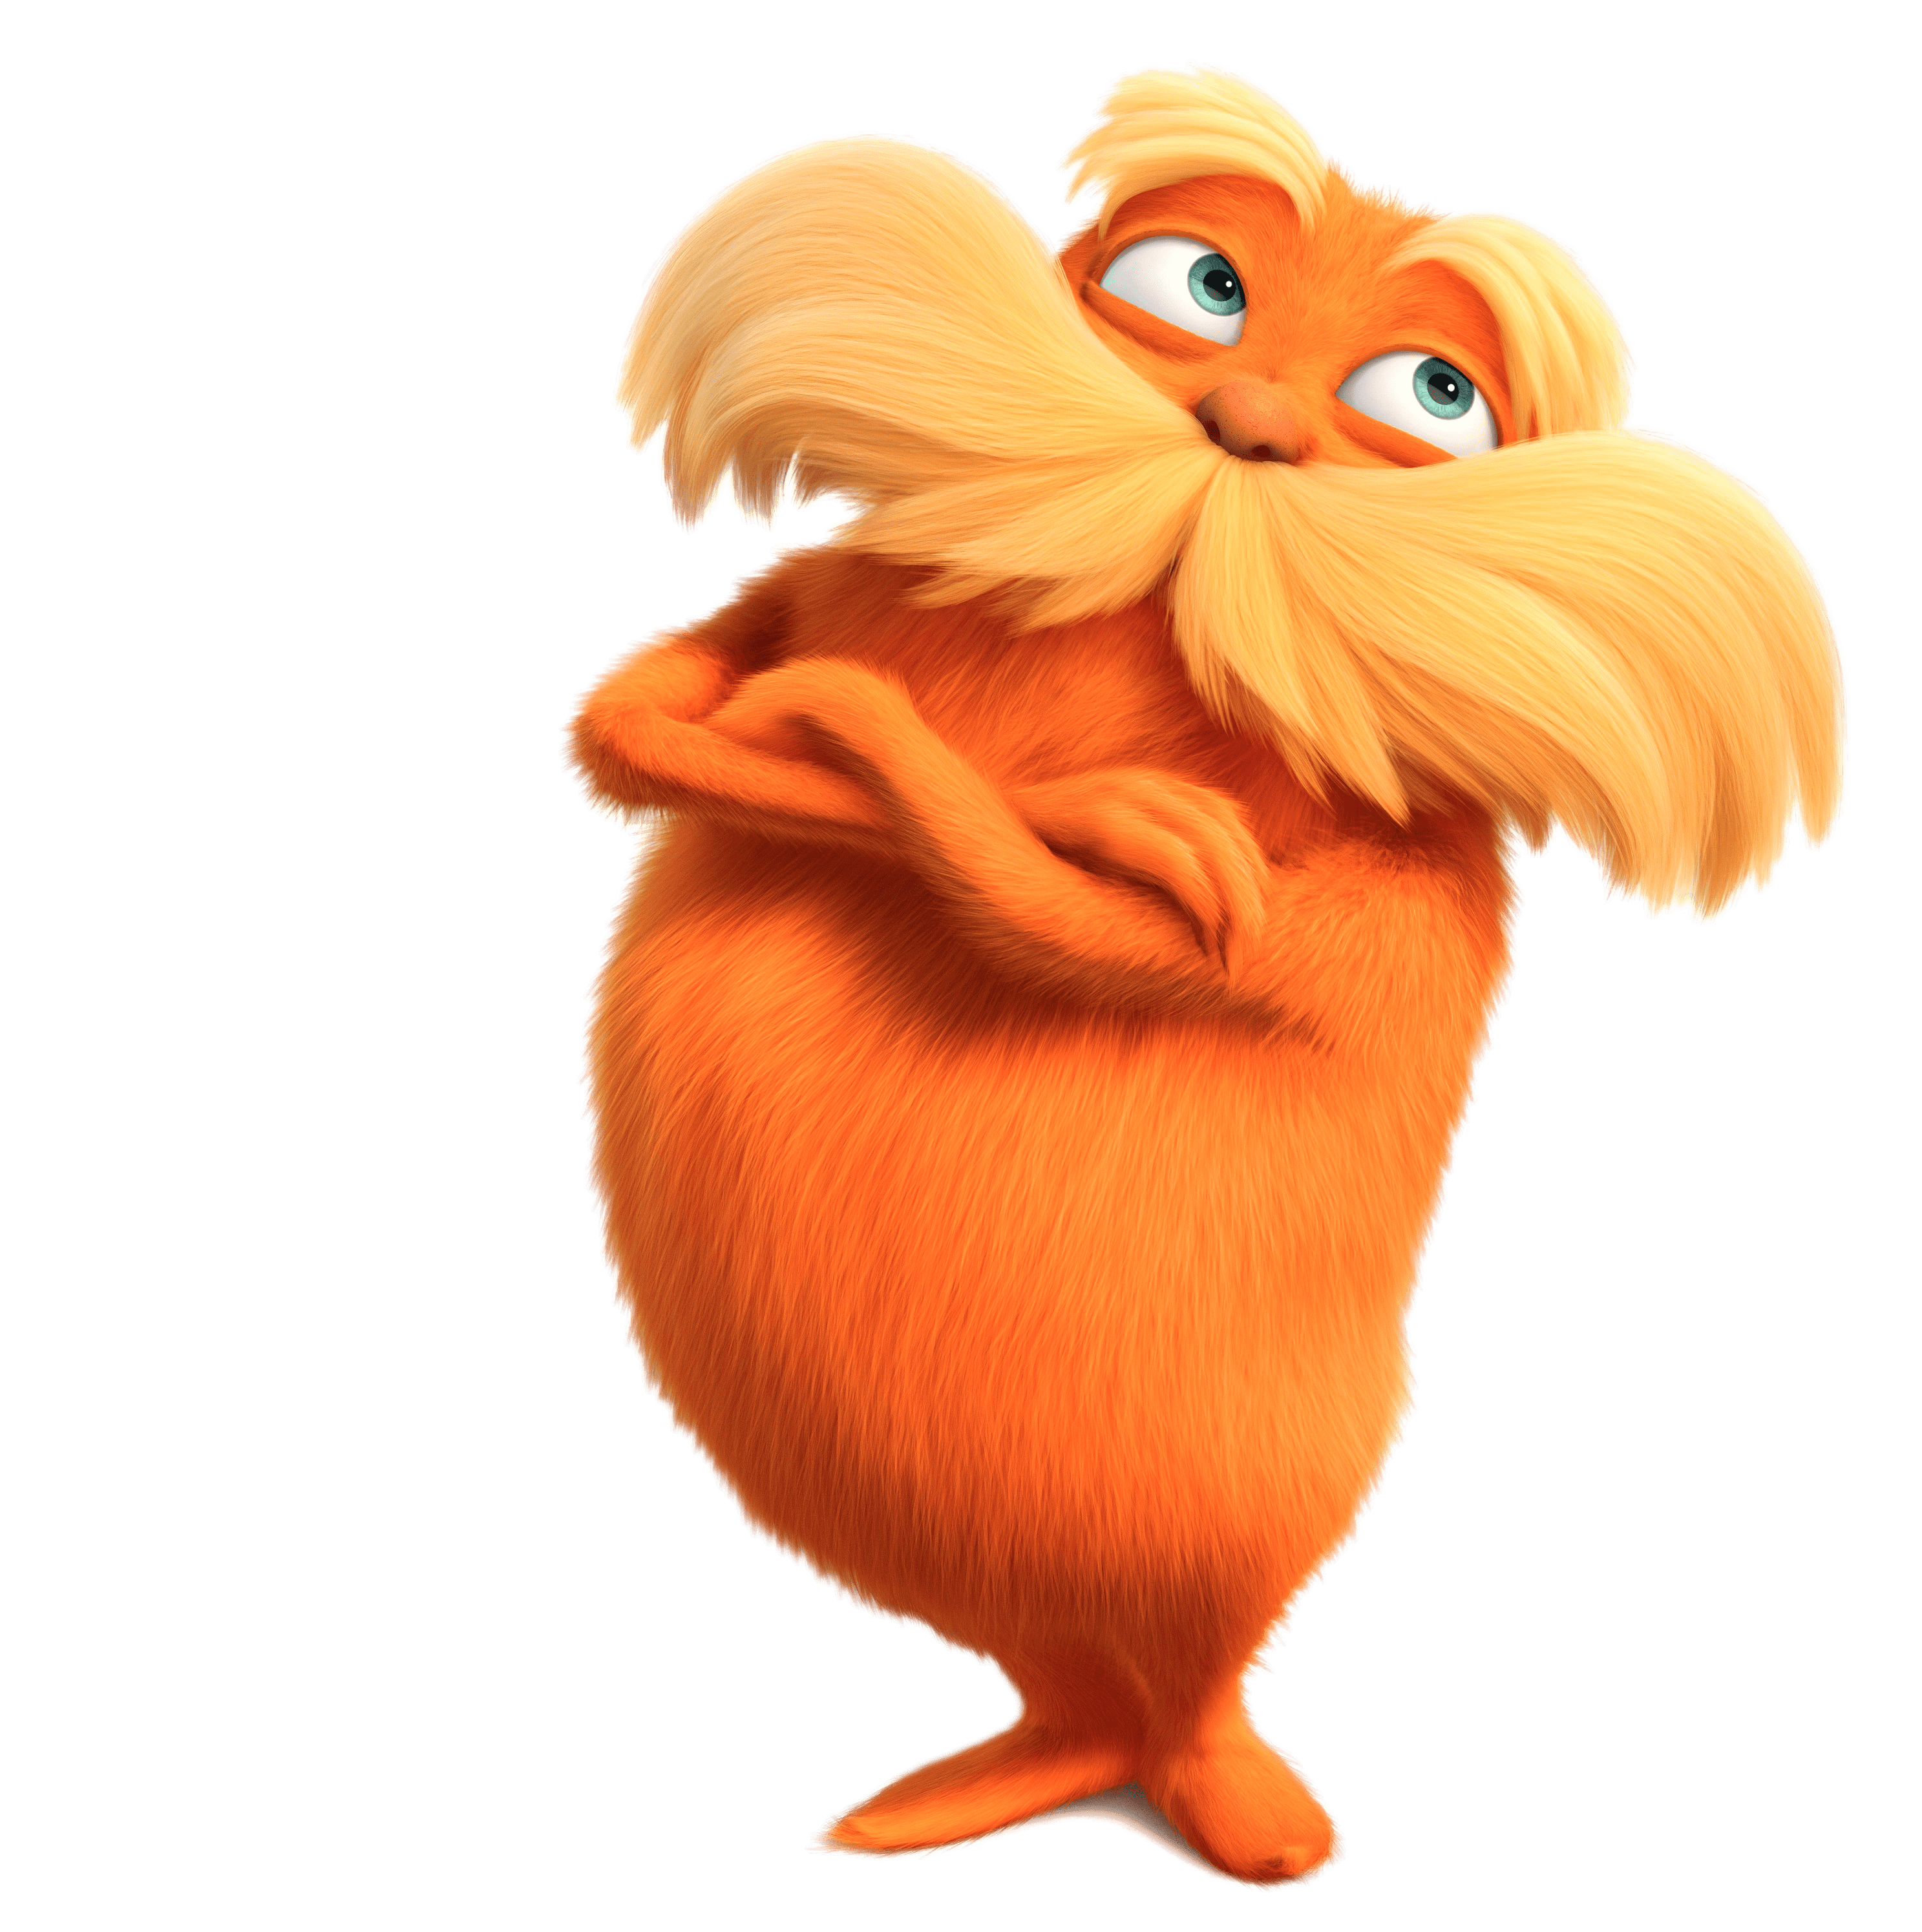 File:The Lorax.png